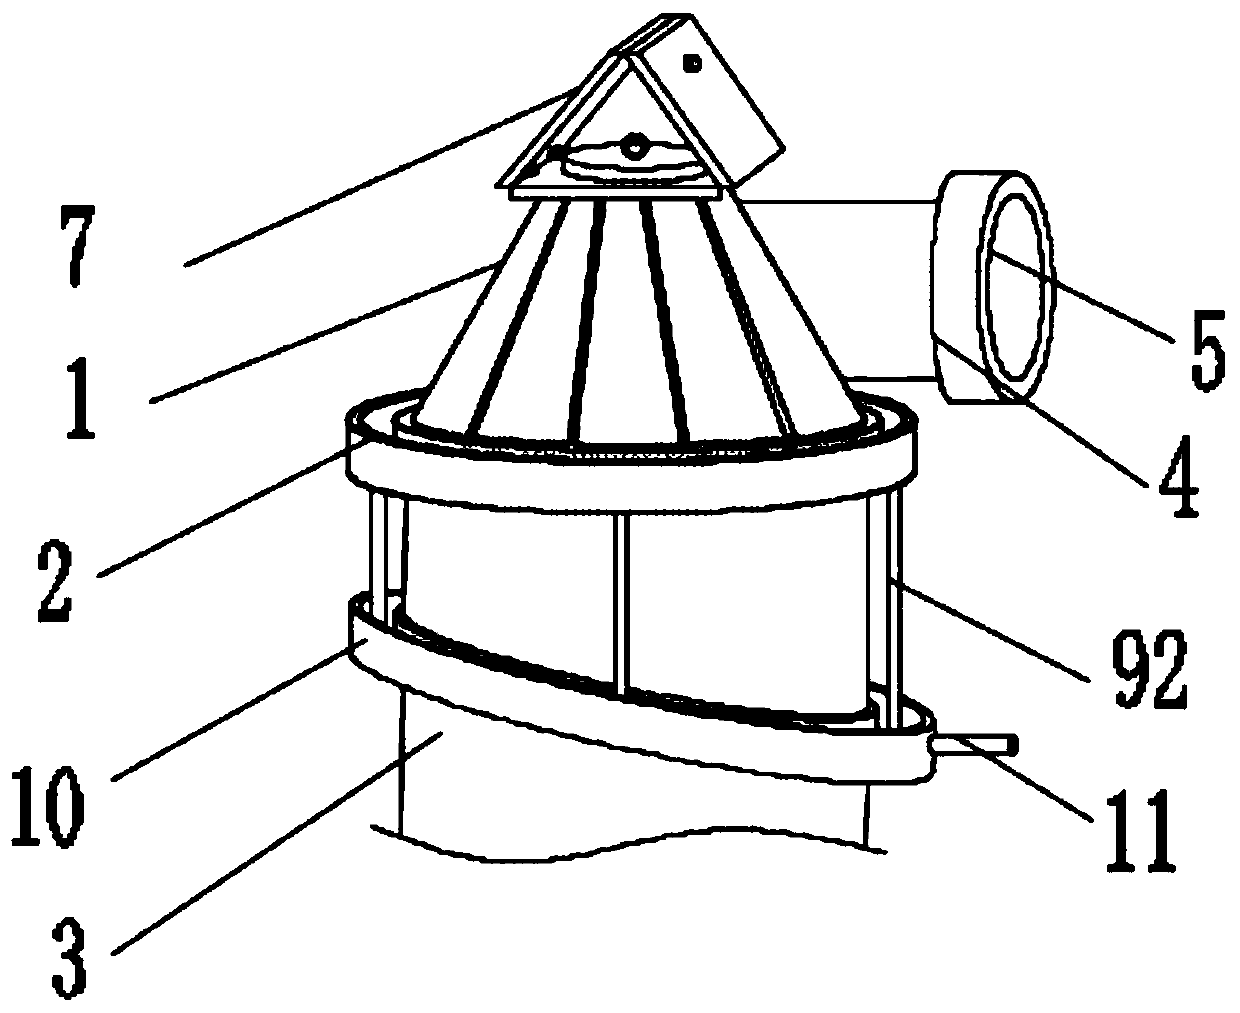 Novel geometrically symmetrical absorption tower flue gas outlet device